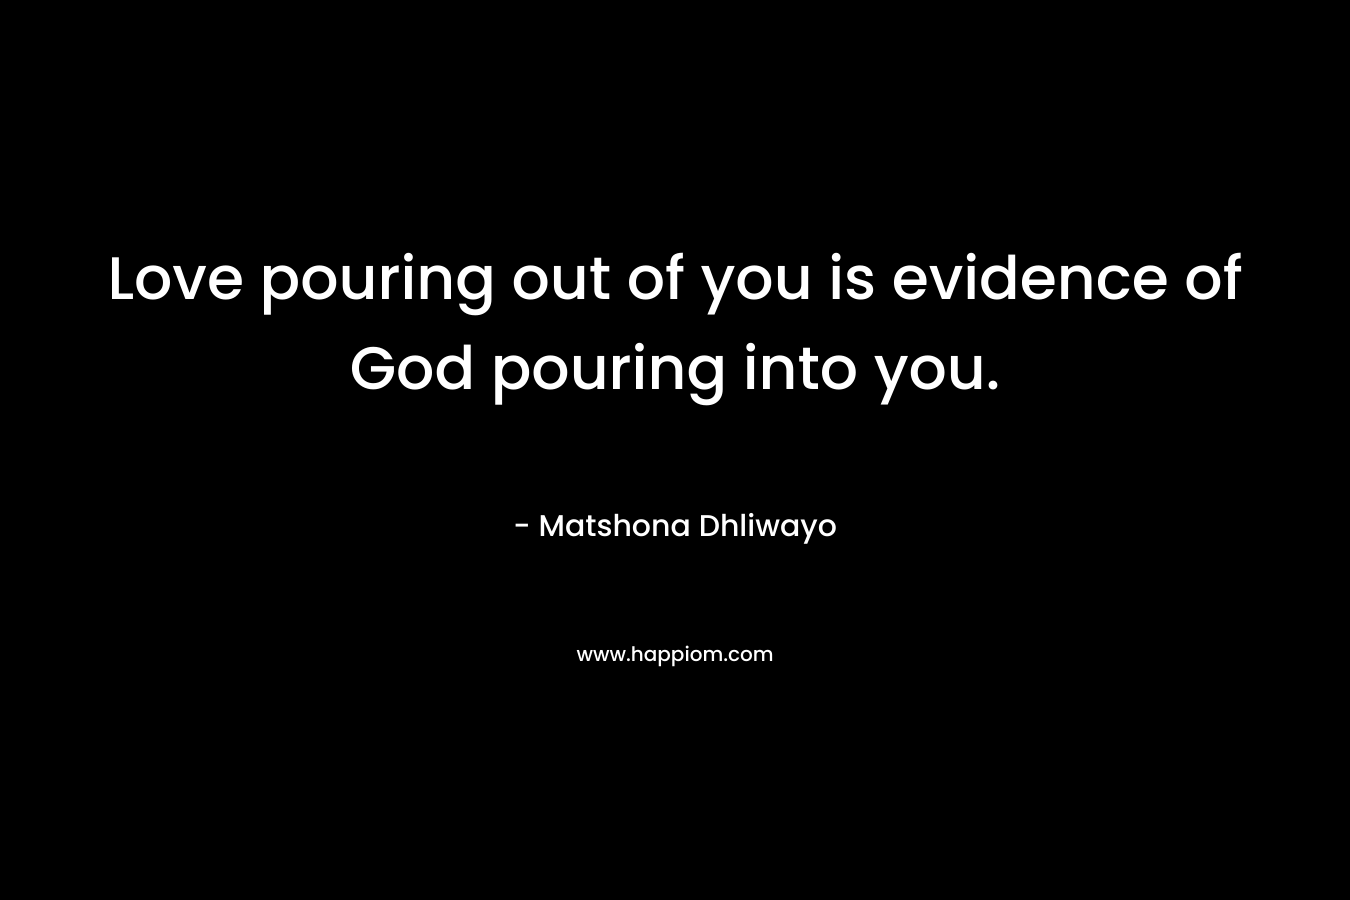 Love pouring out of you is evidence of God pouring into you.